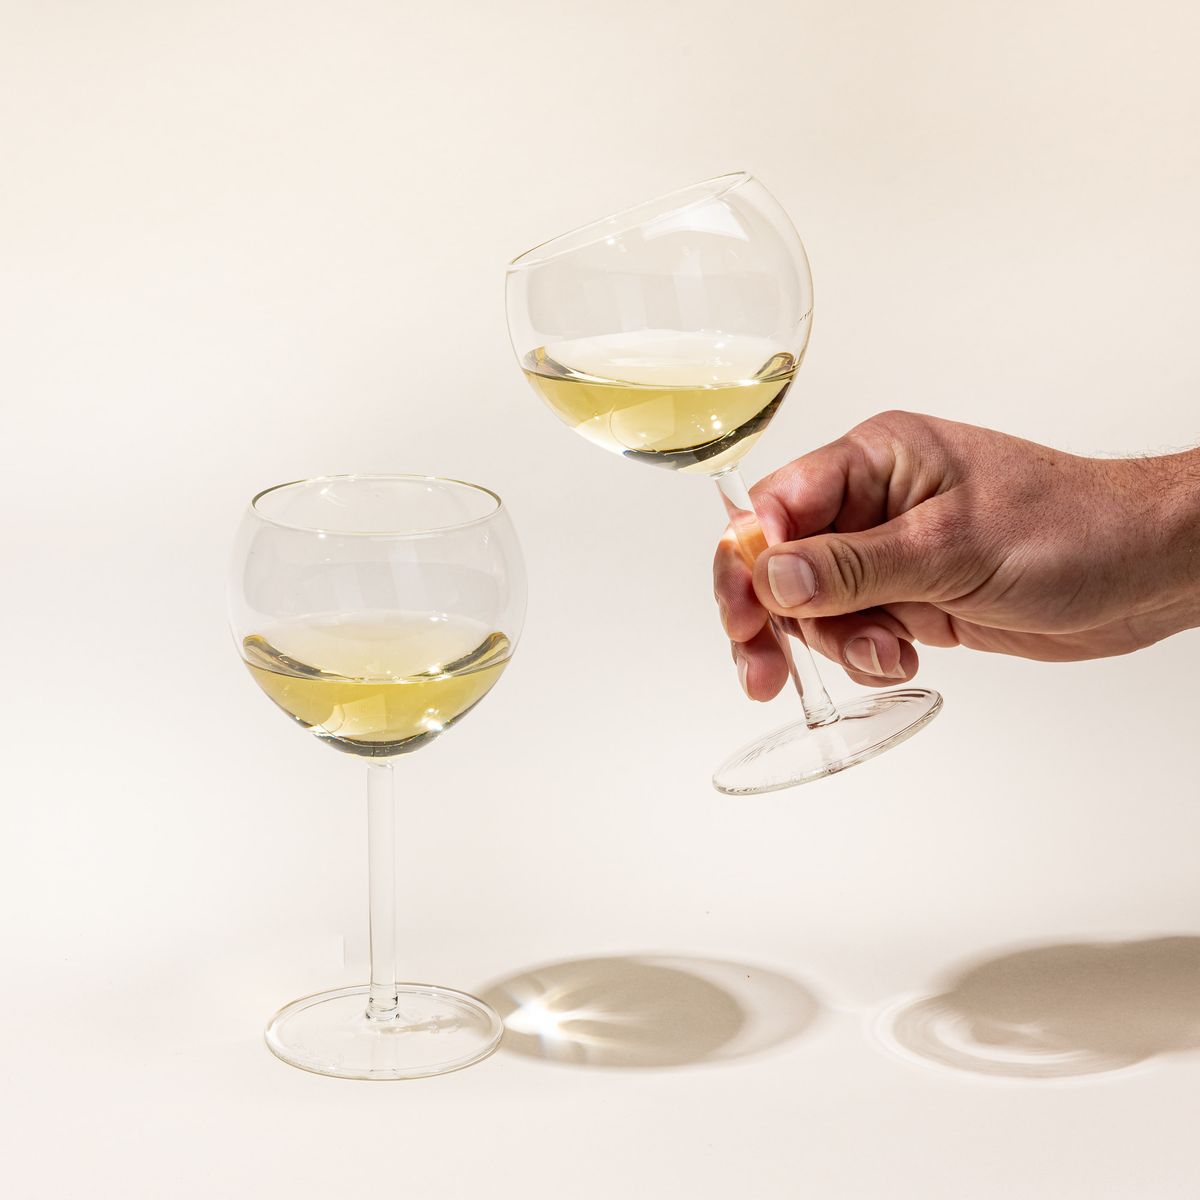 Two simple round clear wine glasses filled with white wine. A hand holds one glass up.